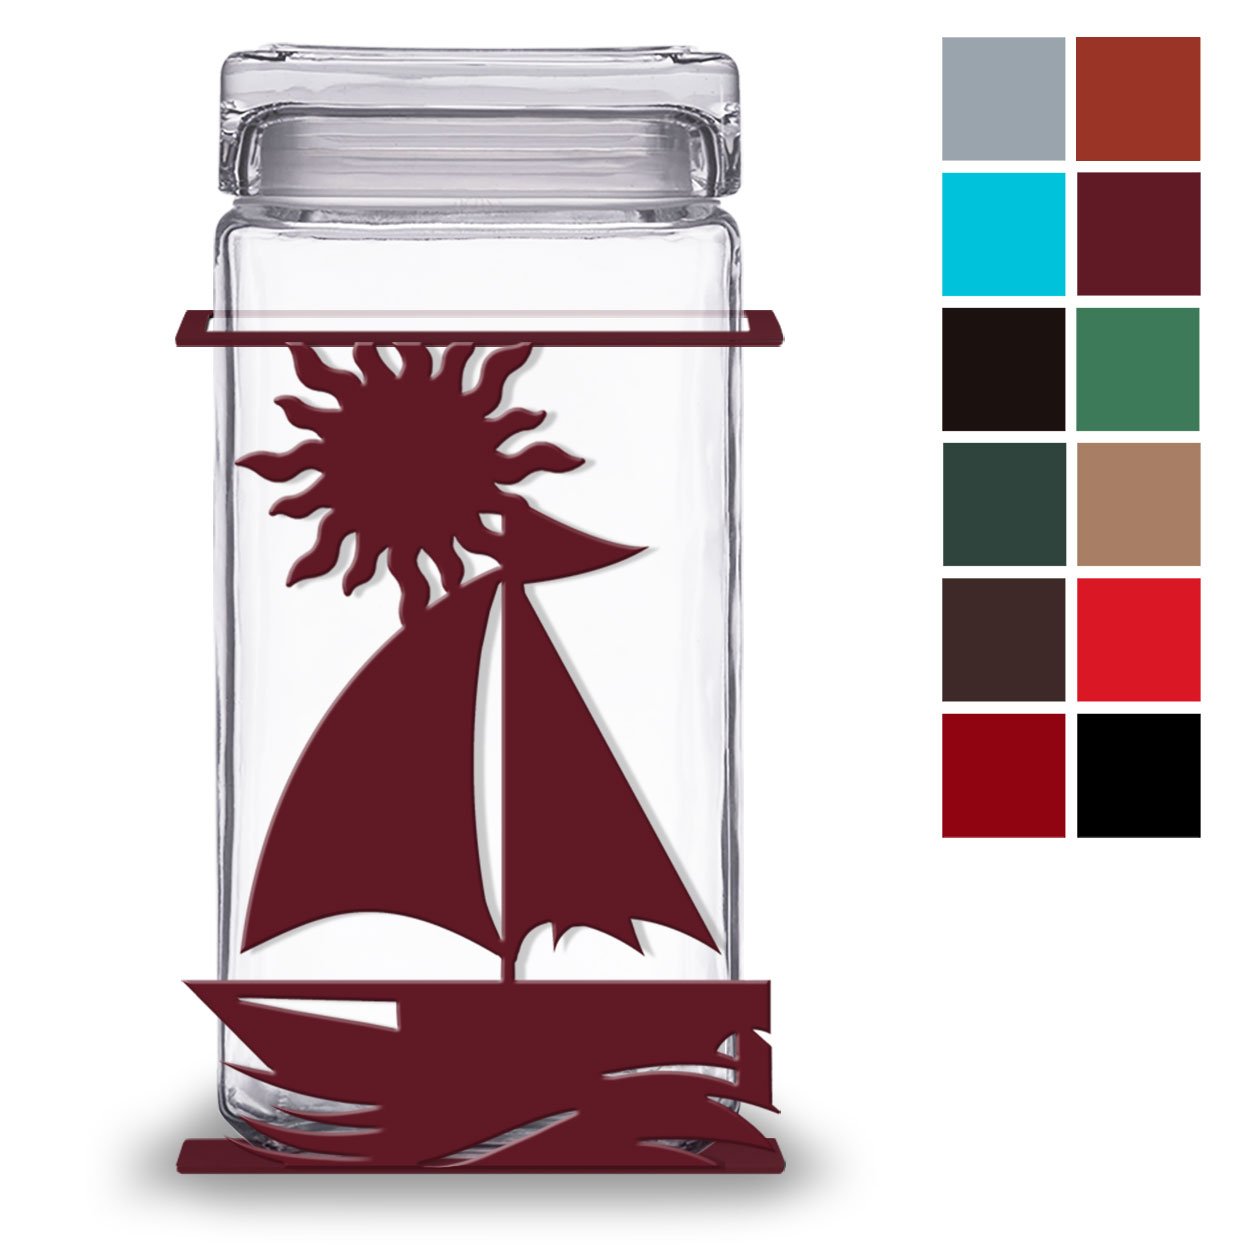 620043 - Sailboat 2-Quart Glass and Metal Kitchen Canister - Choose Color